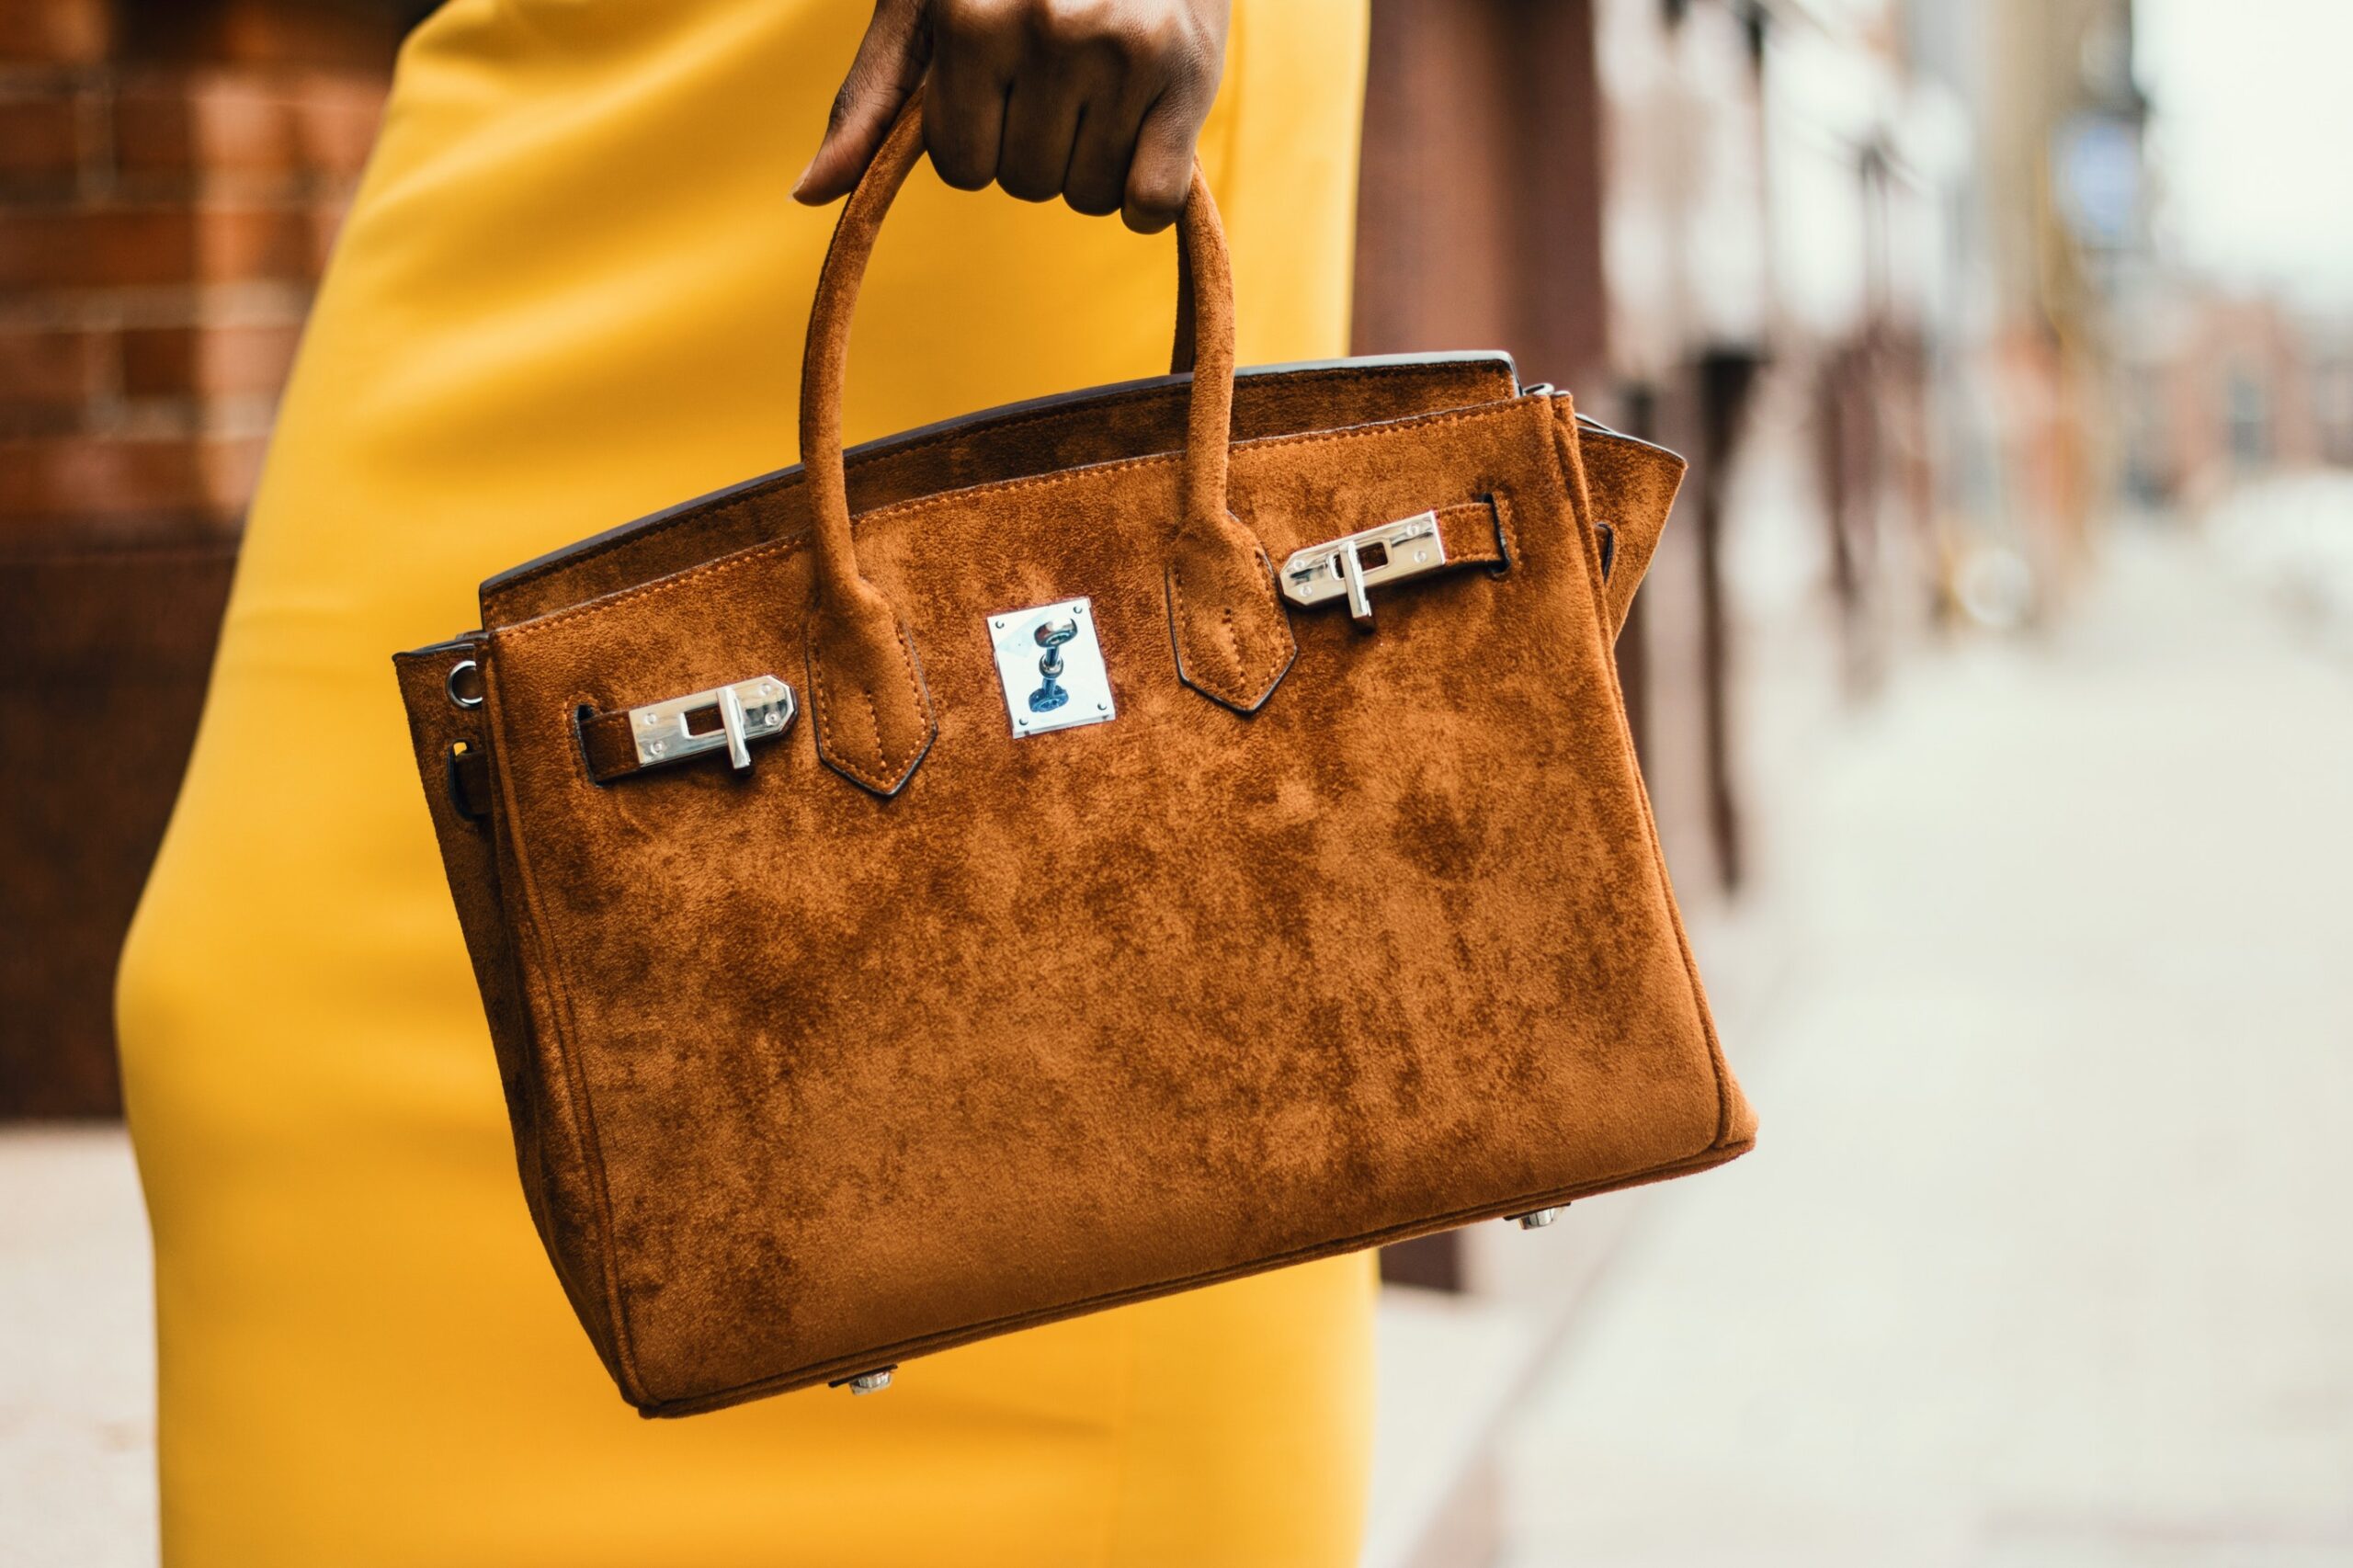 When it comes to choosing a designer handbag, question is which style do you go for? We debunk our top splurge purchase tips | Elle Blonde Luxury Lifestyle Destination Blog